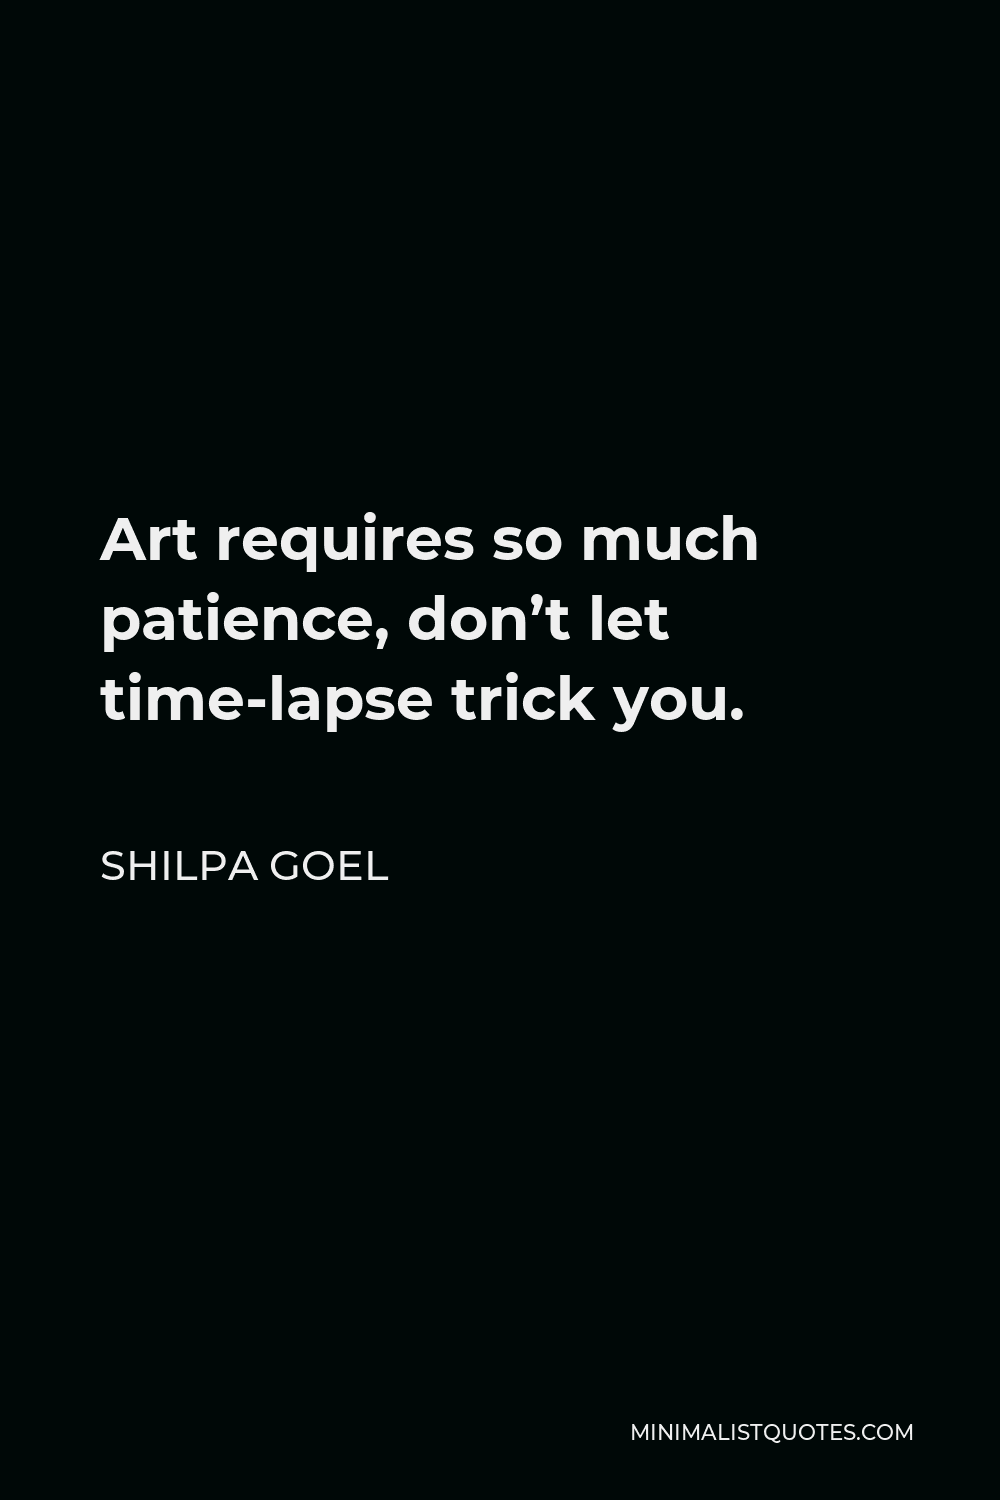 Shilpa Goel Quote - Art requires so much patience, don’t let time-lapse trick you.